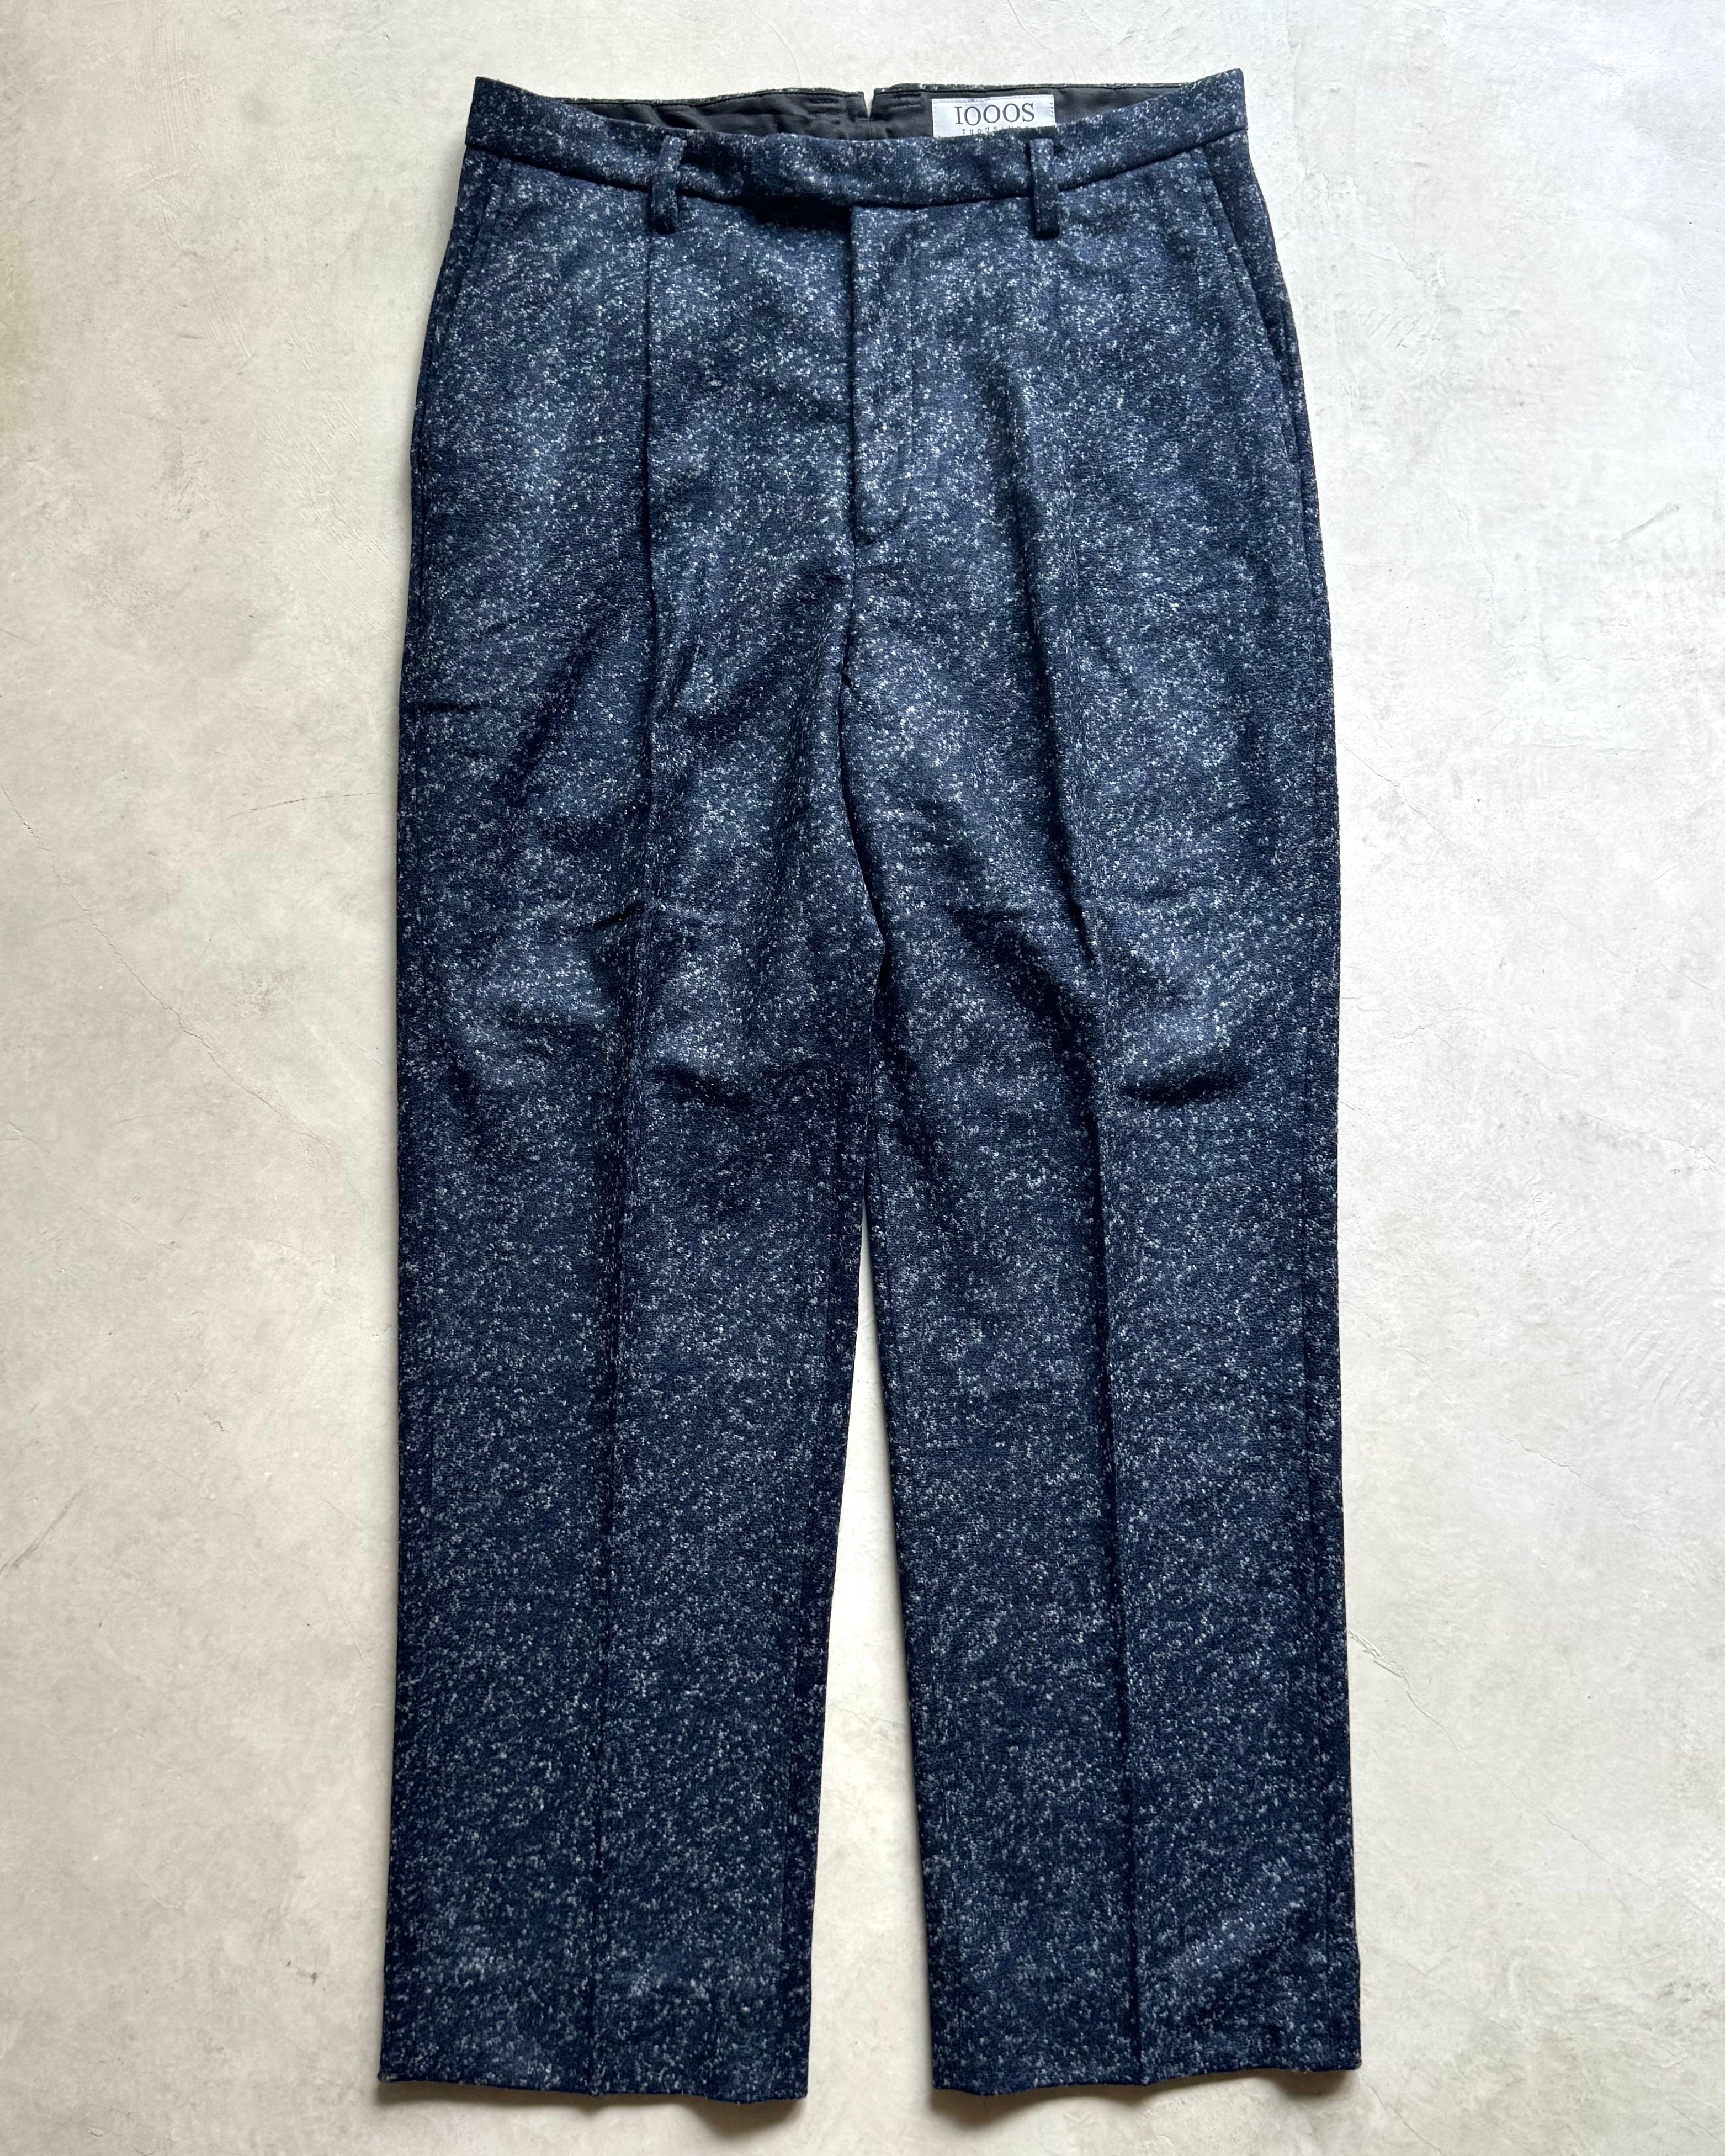 1000s thousands / SILVER KNIT TUCK TROUSERS - BLACK×NAVY MIX